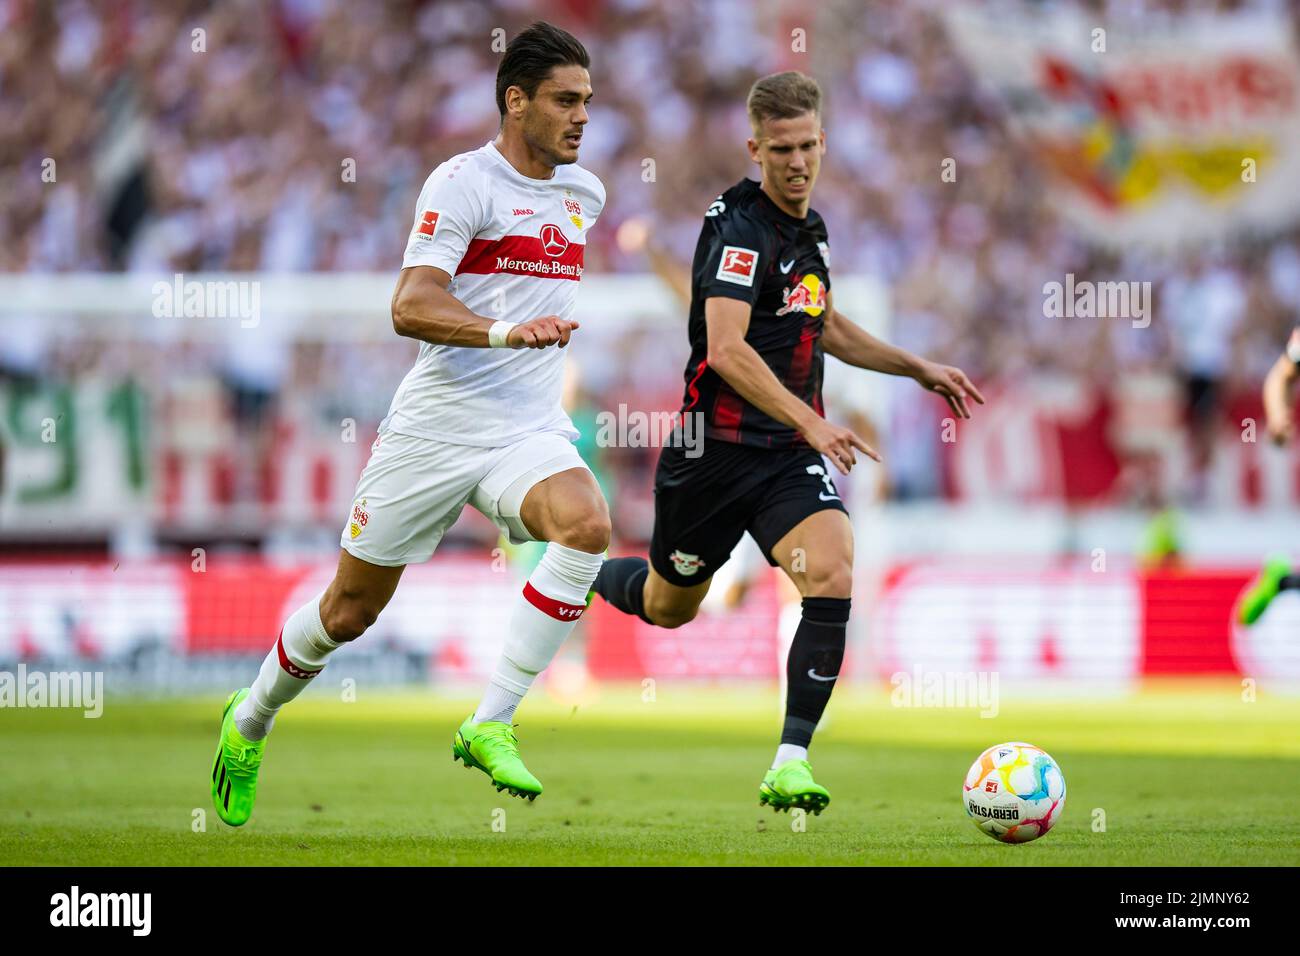 Stuttgart, Germany. 07th Aug, 2022. Soccer: Bundesliga, VfB Stuttgart - RB Leipzig, Matchday 1, Mercedes-Benz Arena. Stuttgart's Konstantinos Mavropanos (l) in action against Leipzig's Dani Olmo. Credit: Tom Weller/dpa - IMPORTANT NOTE: In accordance with the requirements of the DFL Deutsche Fußball Liga and the DFB Deutscher Fußball-Bund, it is prohibited to use or have used photographs taken in the stadium and/or of the match in the form of sequence pictures and/or video-like photo series./dpa/Alamy Live News Stock Photo